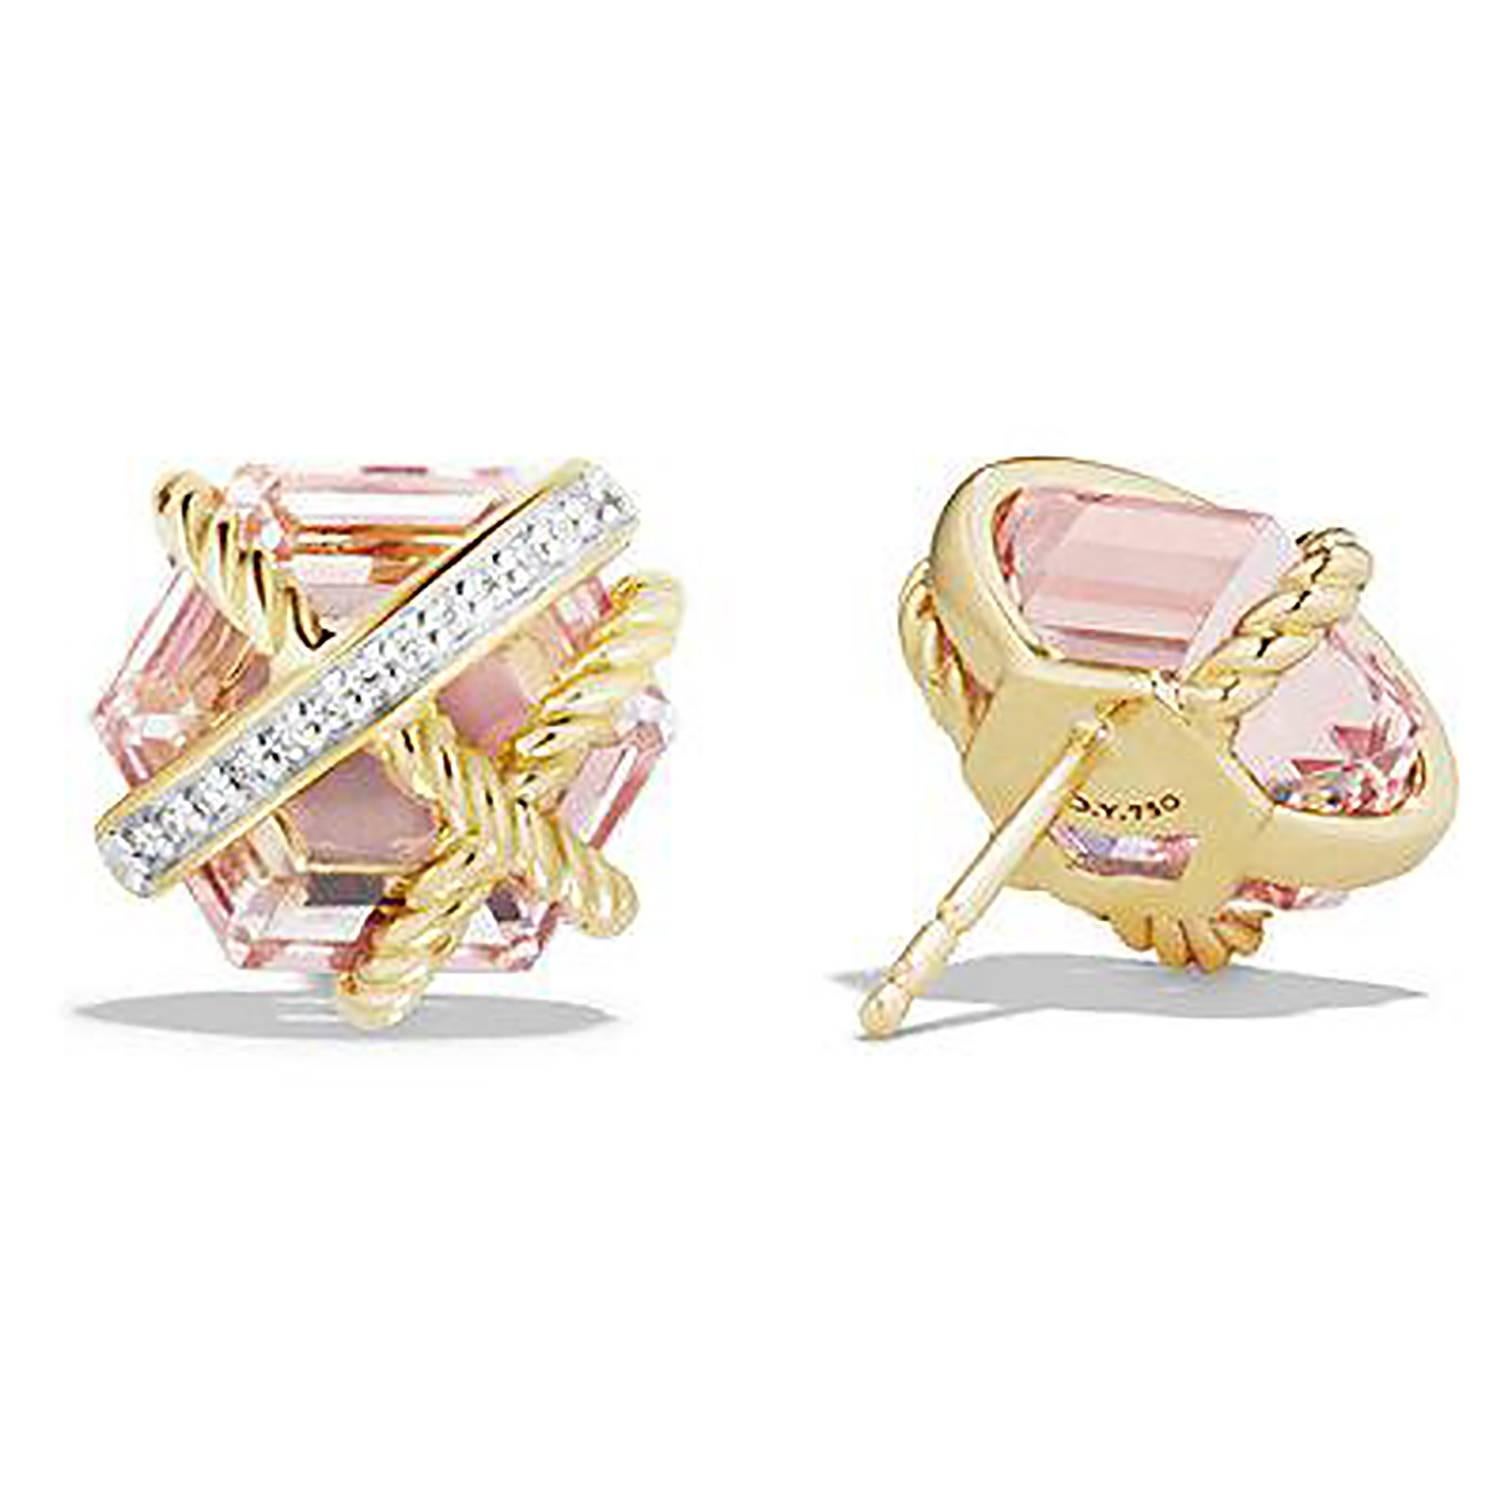 A Pair of morganite and diamond studs by iconic designer David Yurman featuring two hexagonal step-cup morganites and 26 round brilliant diamonds totaling approximately 0.06 carats. The earrings are made in 18k yellow gold and stamped 